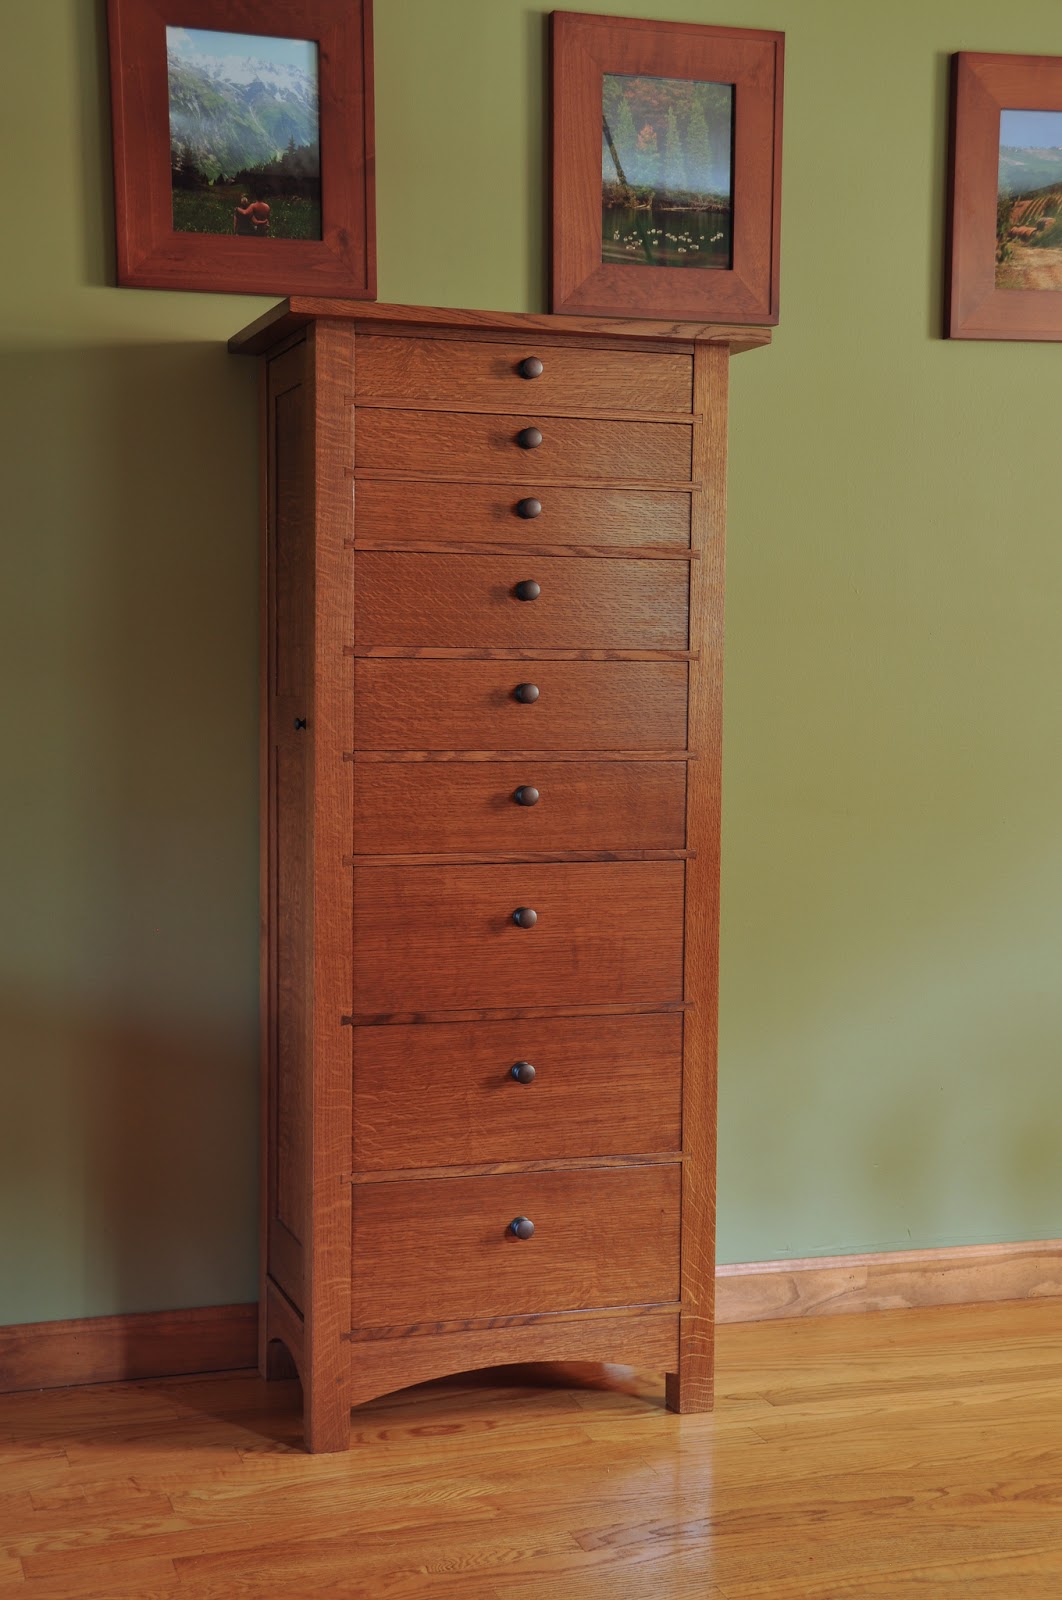 Honey Do Woodworking: Jewelry Armoire / Lingerie Chest 